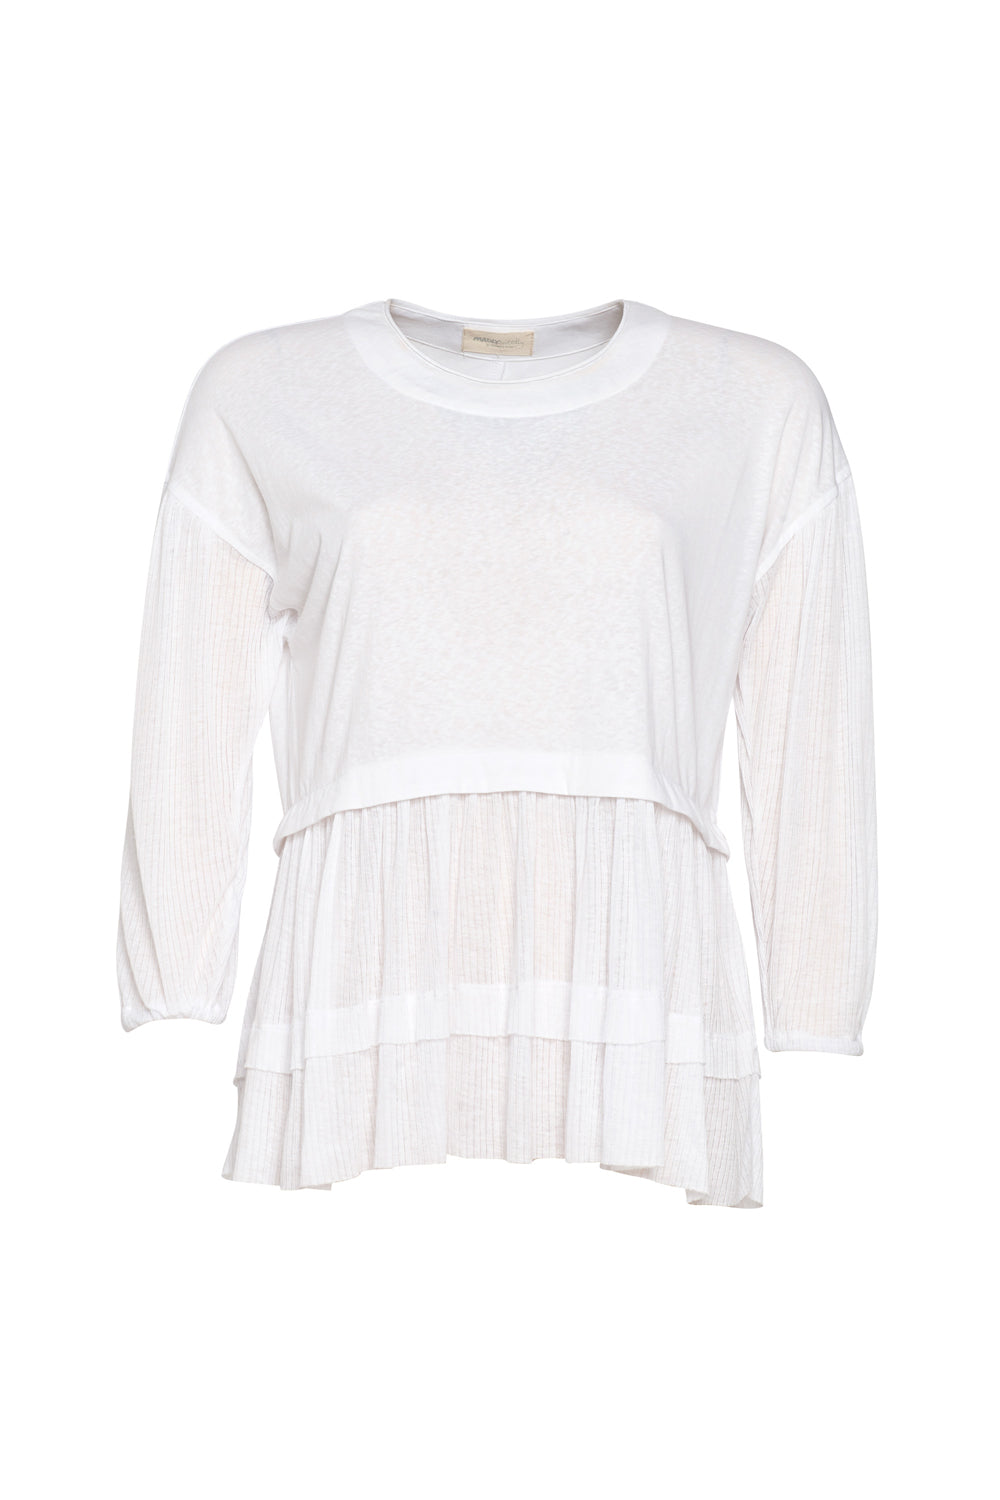 MADLY SWEETLY GELATI TOP - WHITE - RV - THE VOGUE STORE